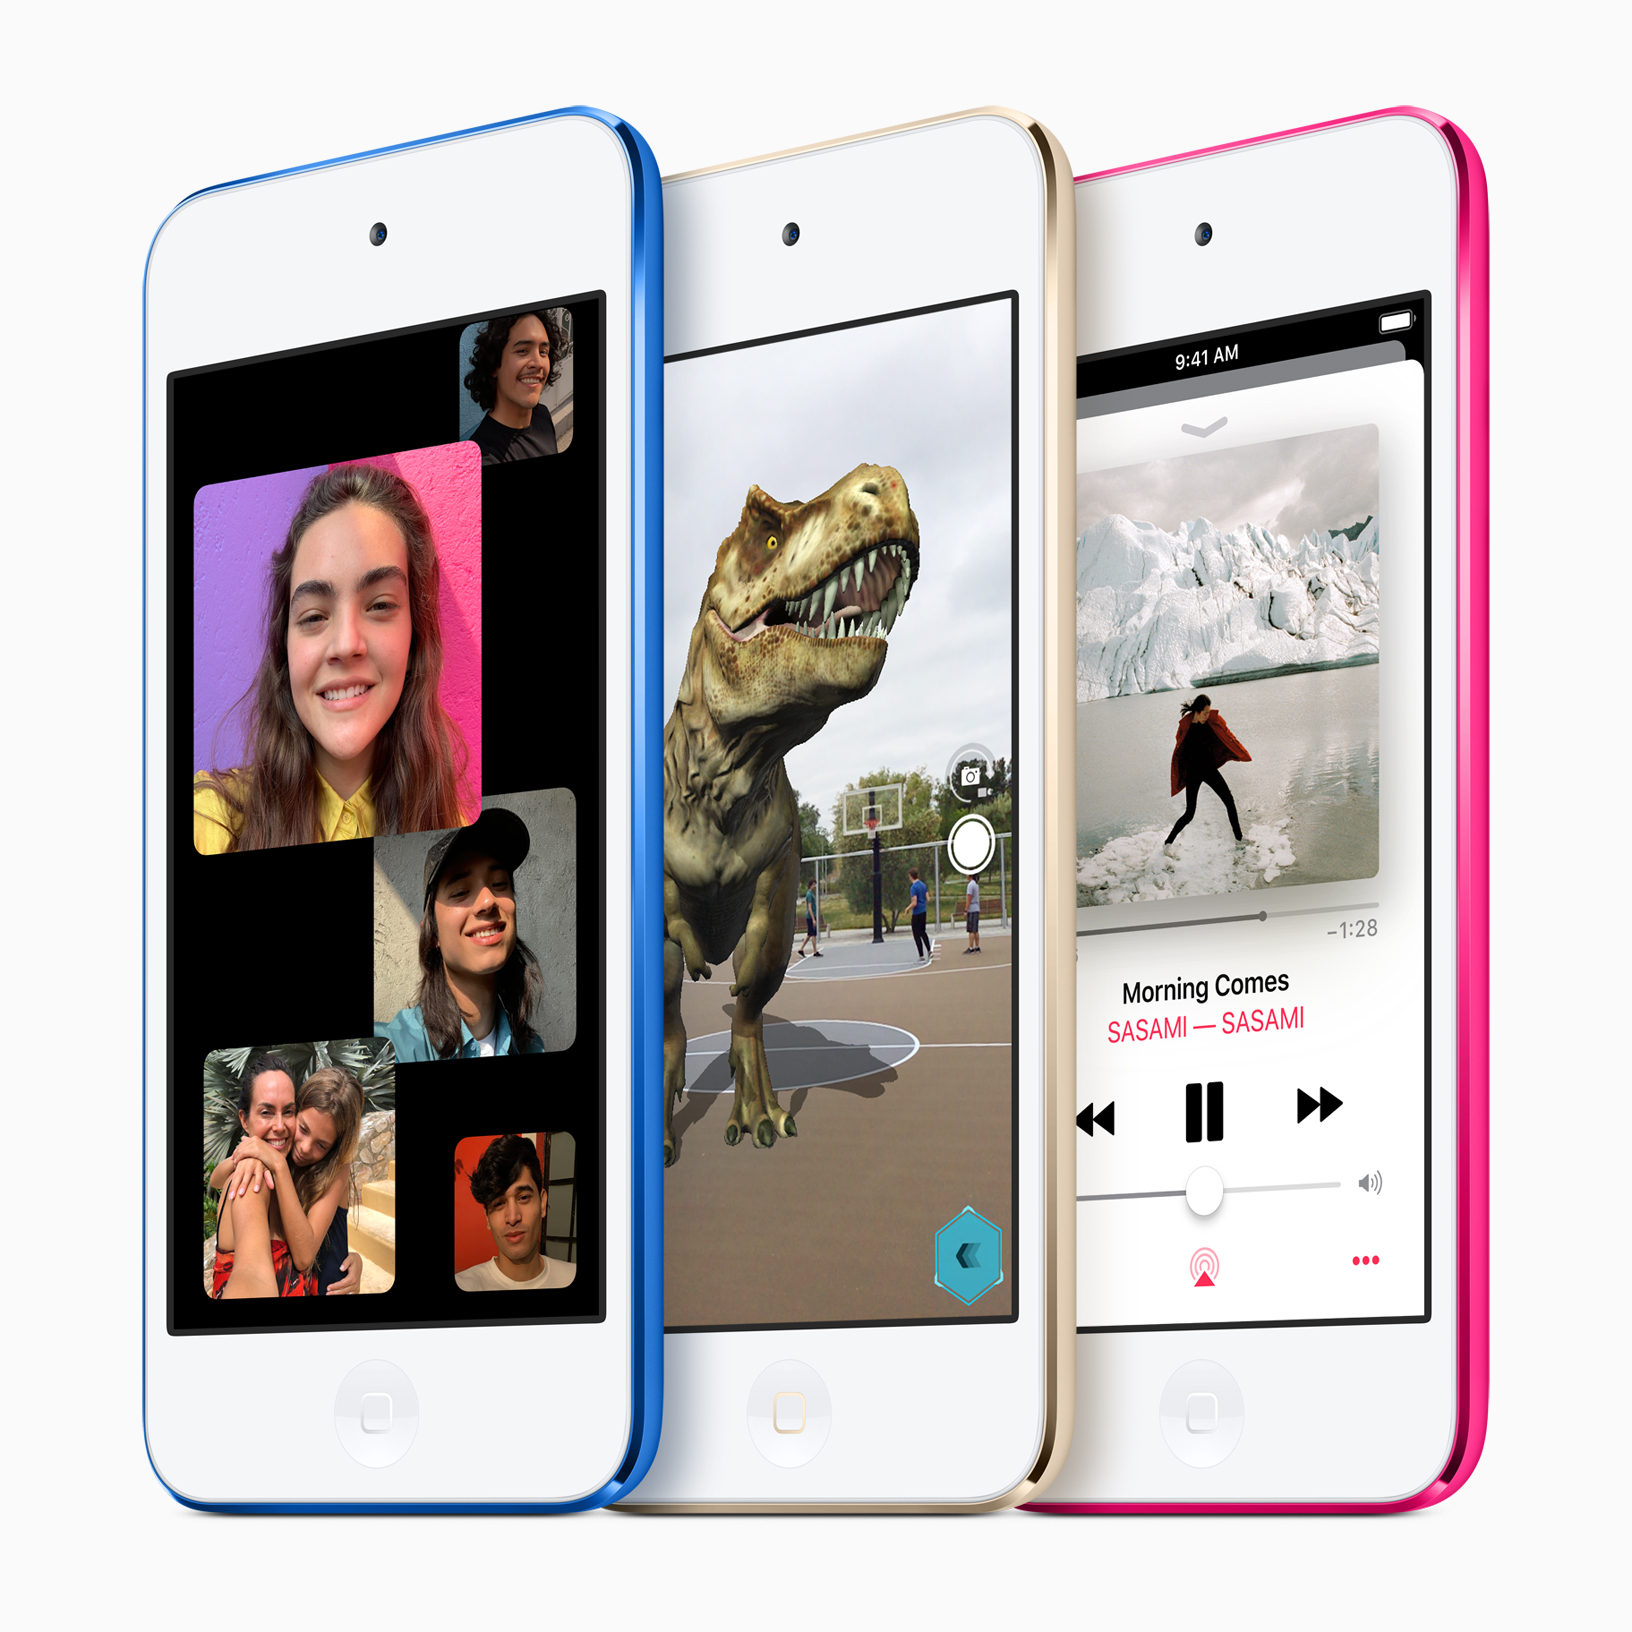 New iPod touch delivers even greater performance Apple